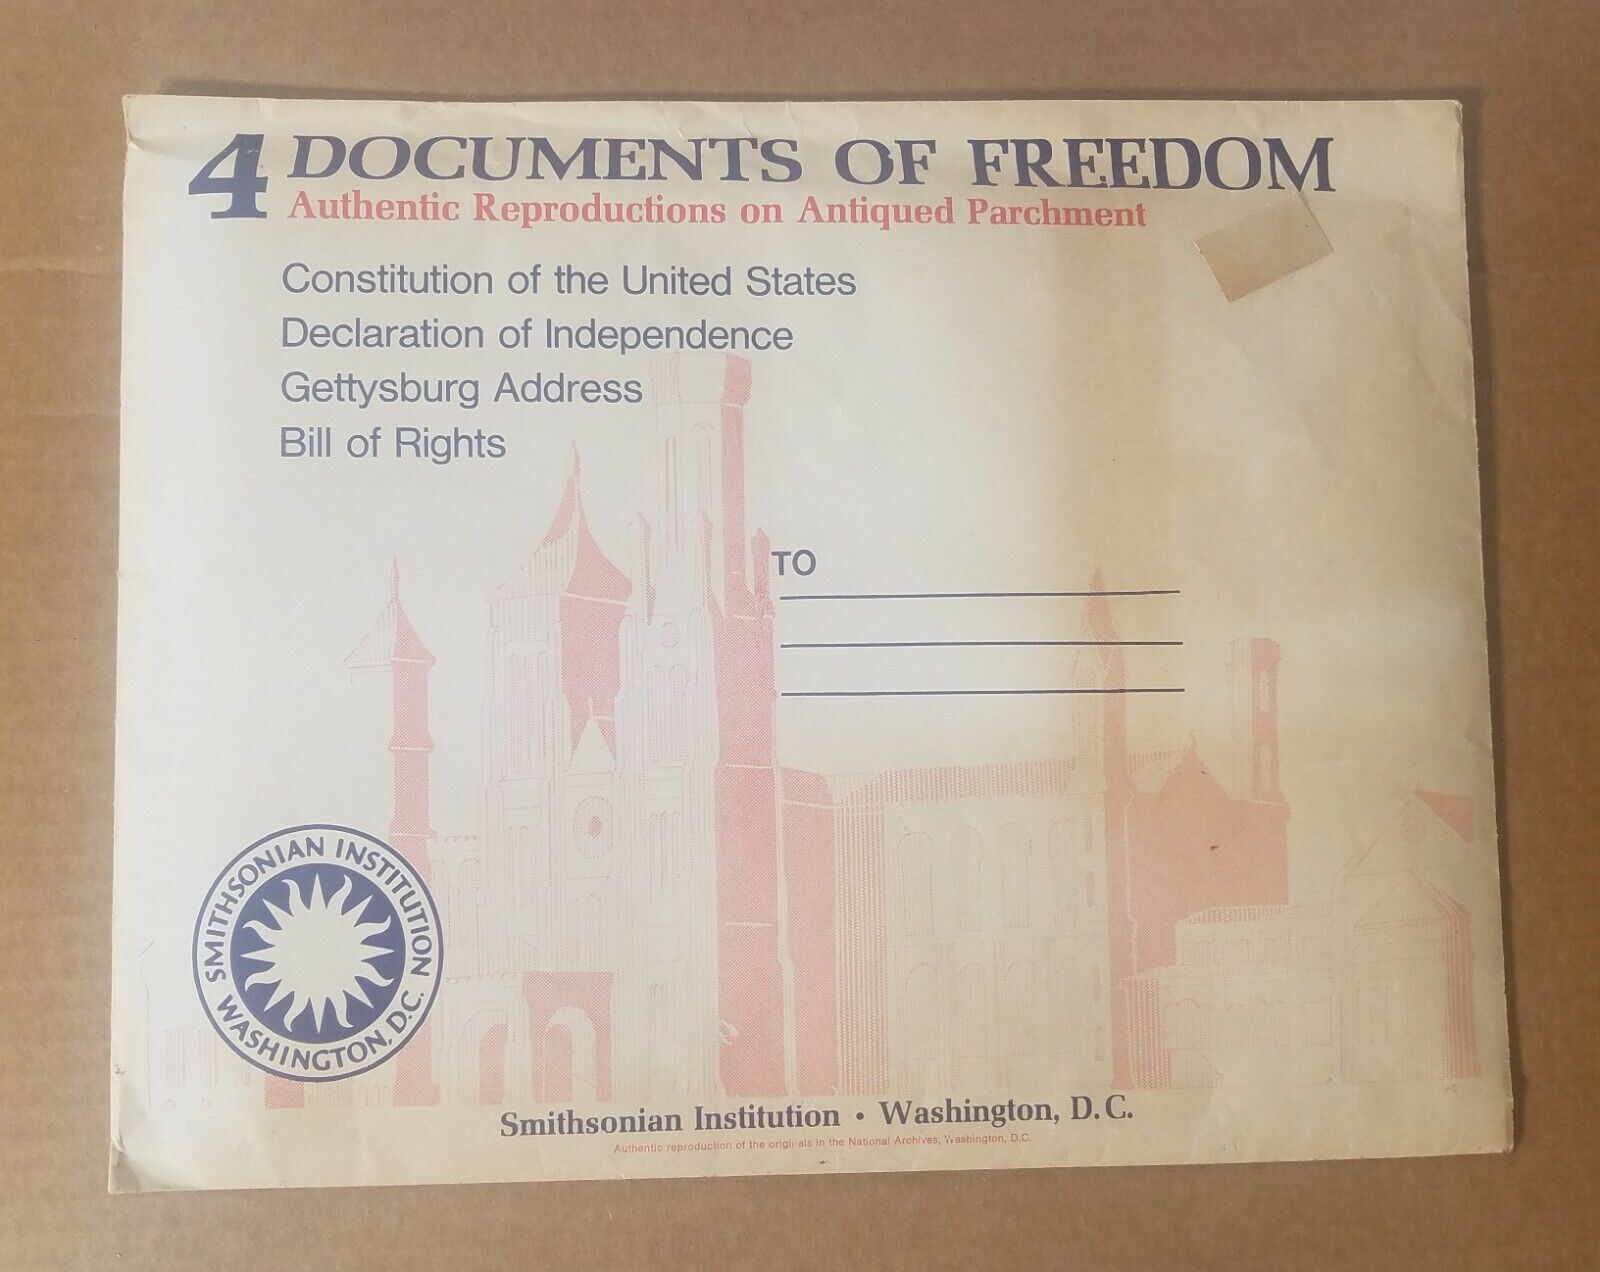 Authentic Reproduction of Antiqued Parchment, 4 Document of Freedom